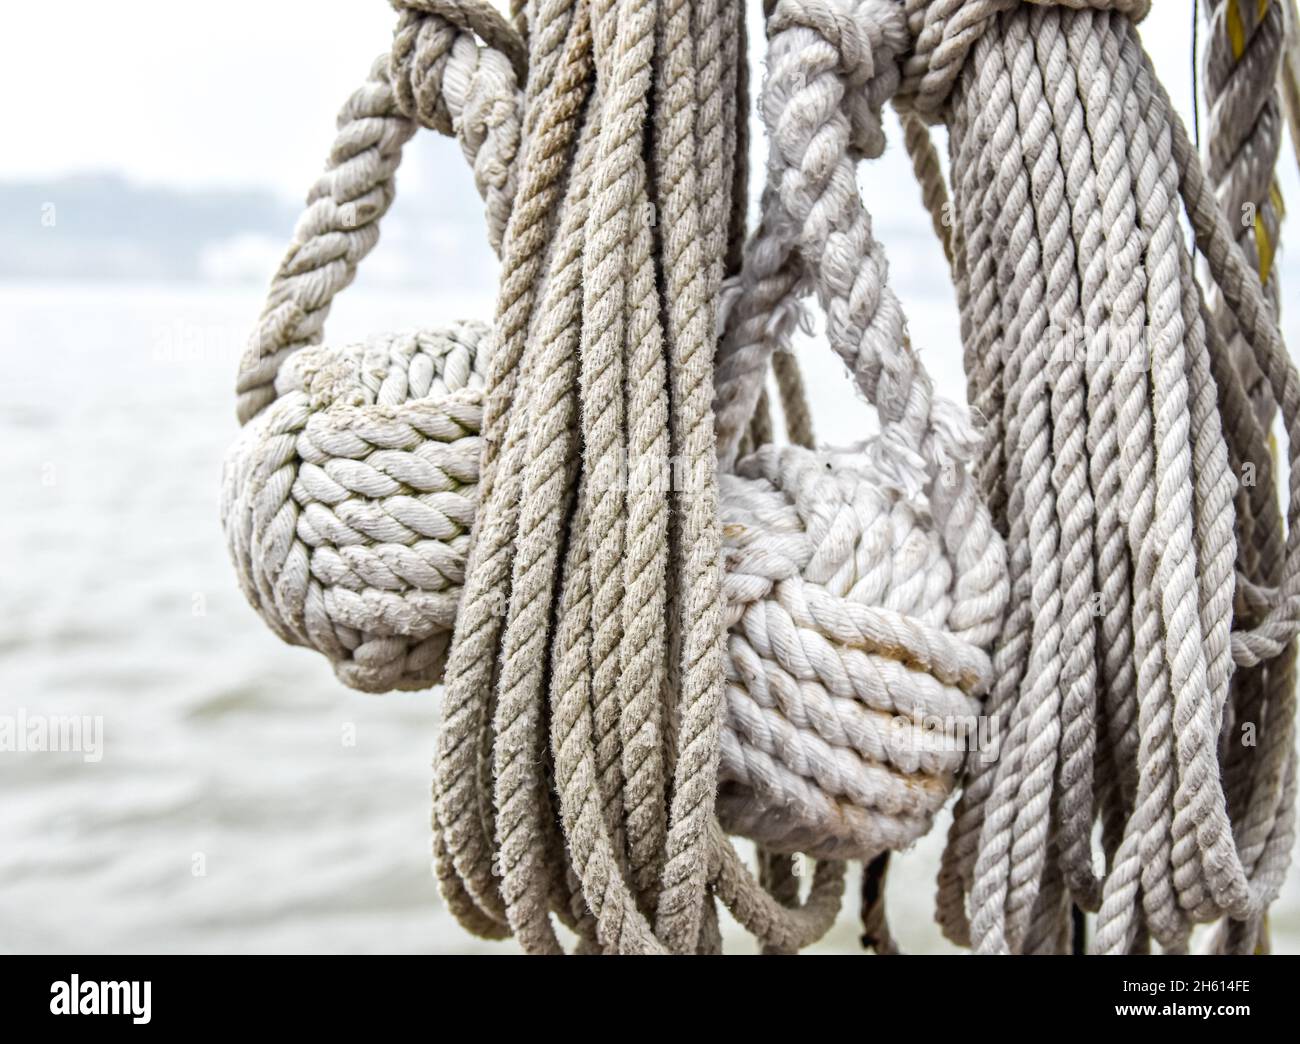 Two monkey's fist knots tied to the end of ropes to use as weighs making them easier to throw. Also used as an ornamental knot. Closeup. Copy space. Stock Photo